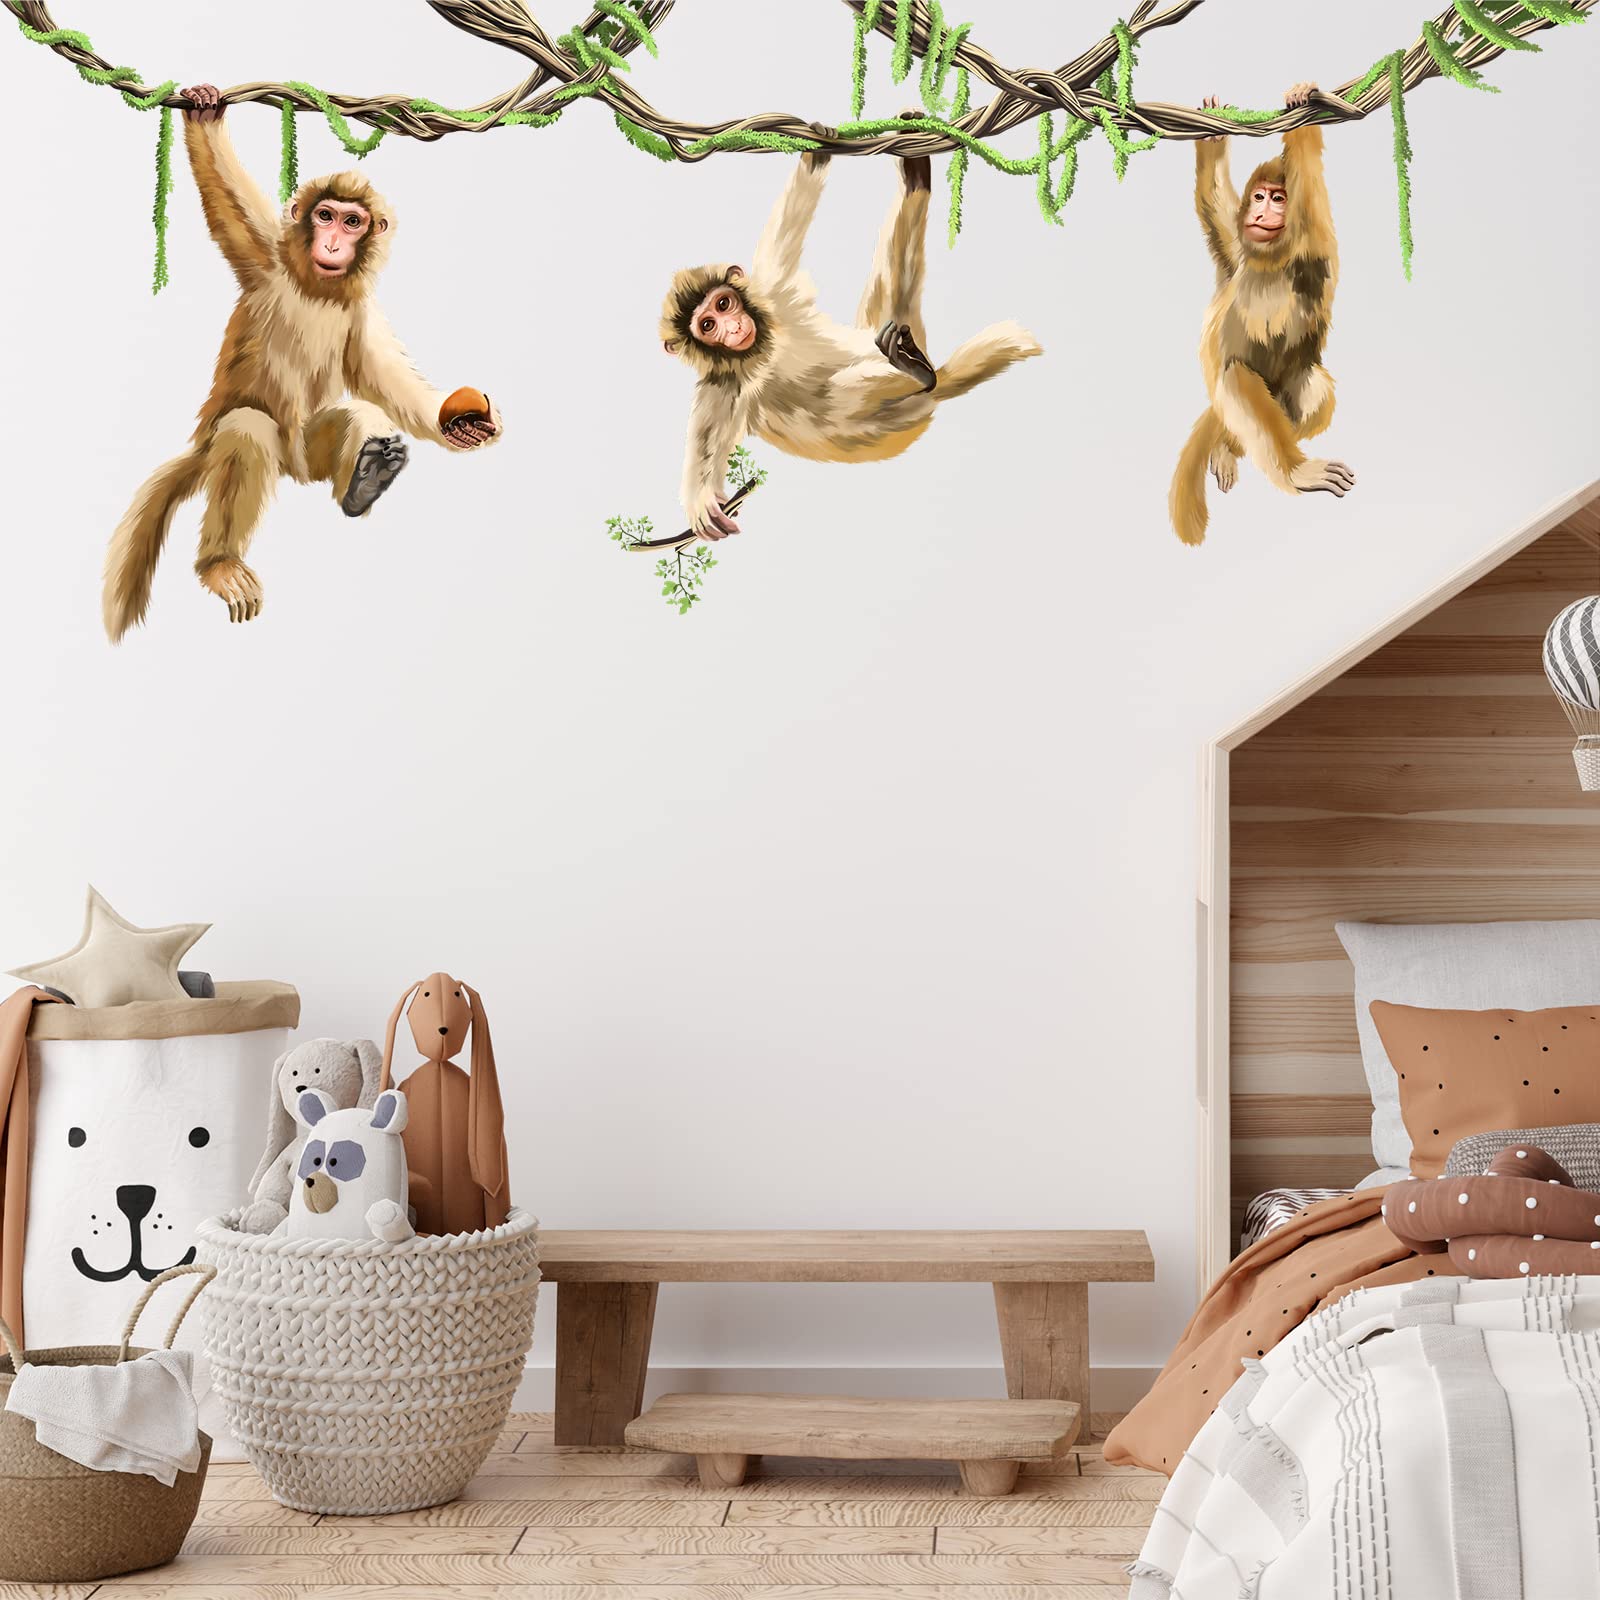 RoyoLam 78.7'' x 32'' Large Monkeys Hanging on Vines Wall Decal Nursery Macaque Animal Wall Sticker Removable Peel and Stick Wall Art Decor for Kids Baby Classroom Preschool Living Room Bedroom School